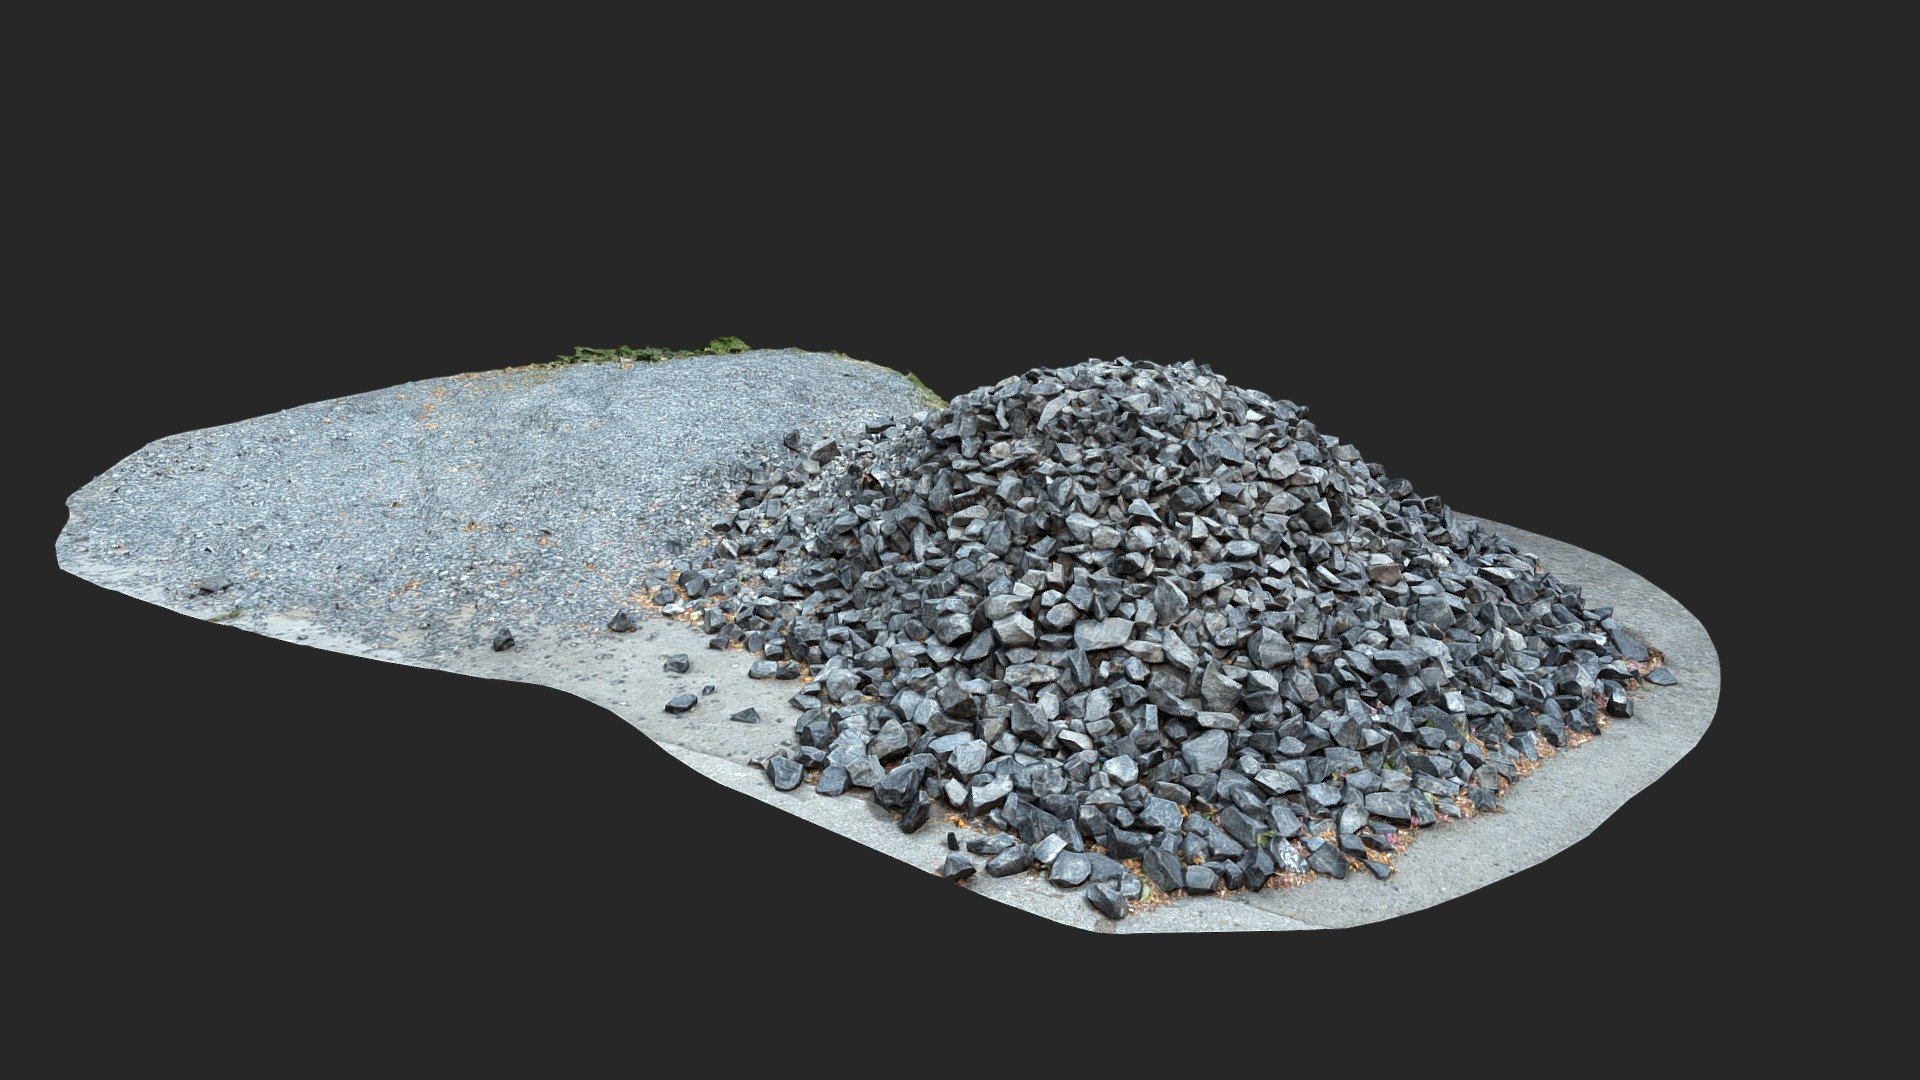 3d scan of gravel and crushed stones on ground.

Reconstructed in reality capture with 175 12mpx photos. 8k diffuse texture and 4k normal 3d model